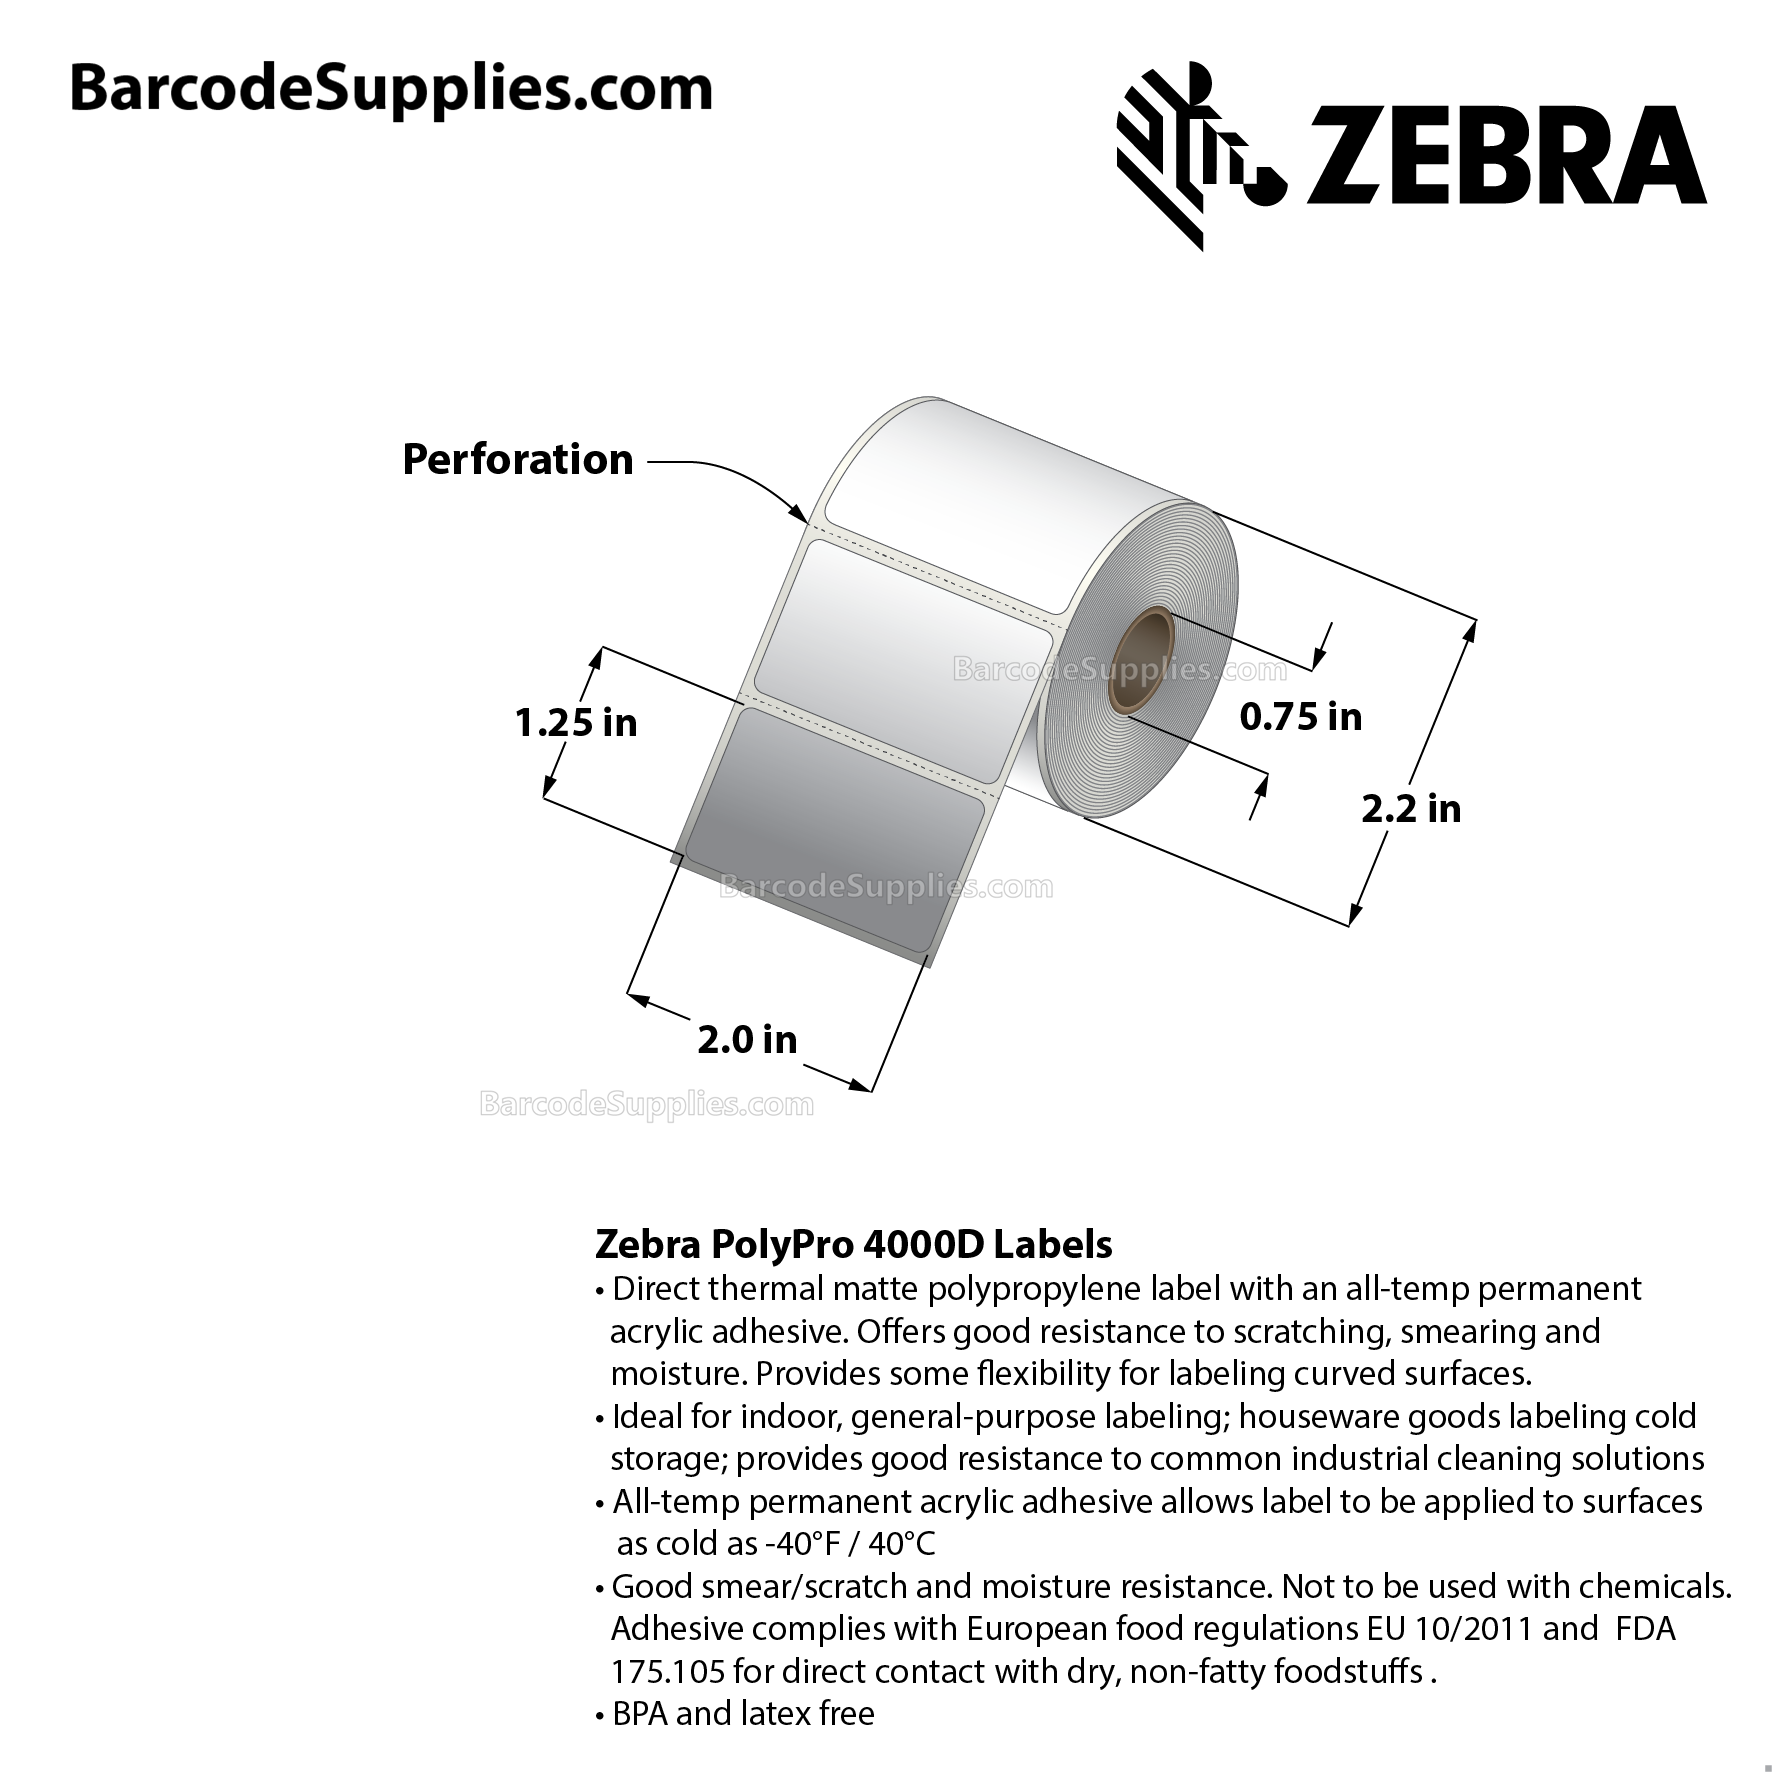 2 x 1.25 Direct Thermal White PolyPro 4000D Labels With All-Temp Adhesive - Perforated - 380 Labels Per Roll - Carton Of 12 Rolls - 4560 Labels Total - MPN: 10015778